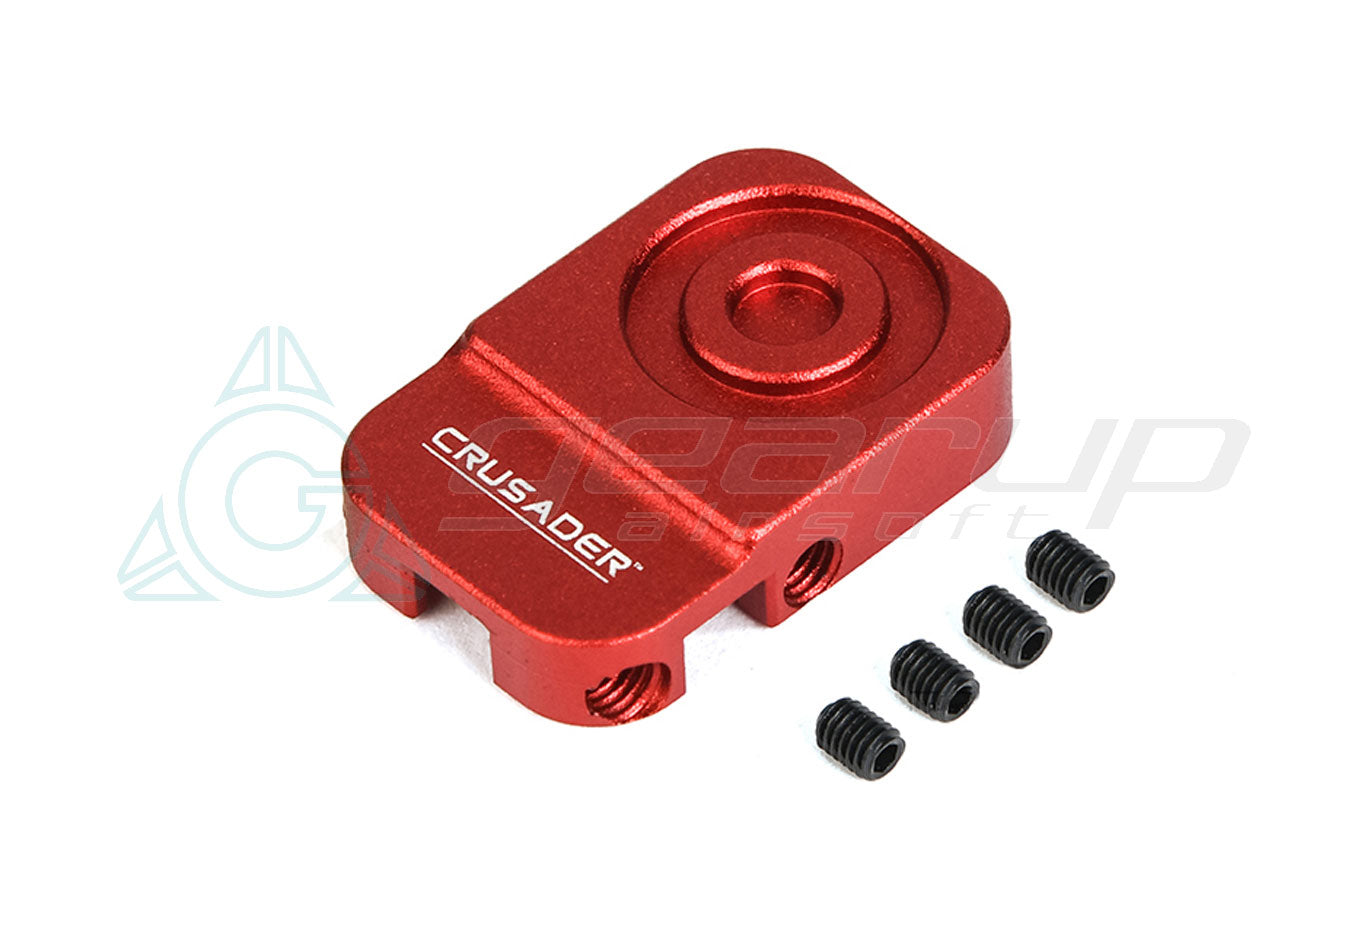 M4 Bolt Catch Extende((Red)(for M4 GBB)